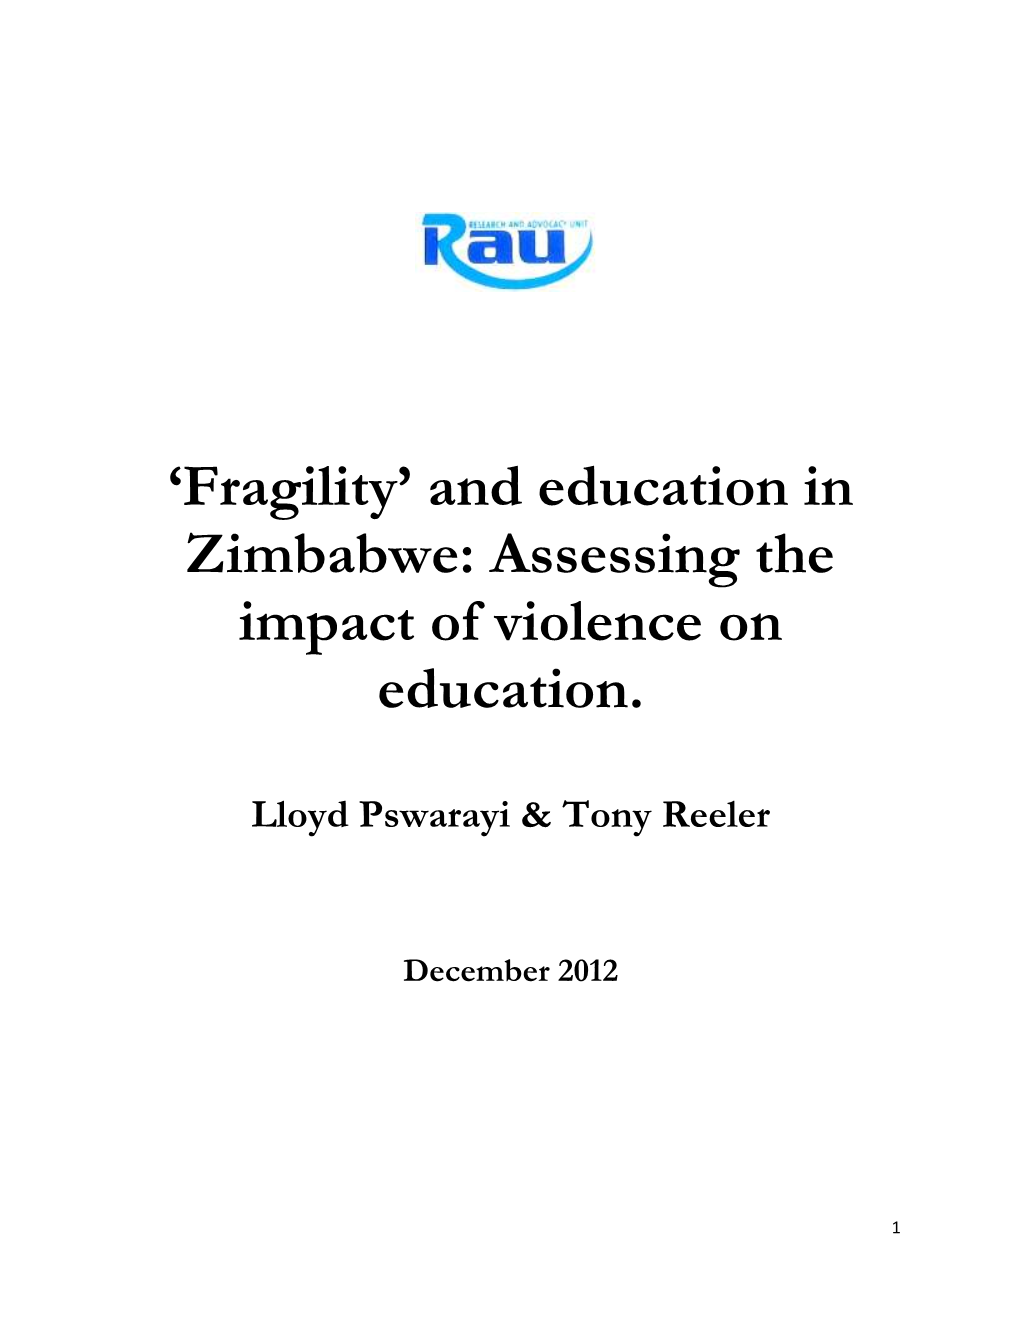 And Education in Zimbabwe: Assessing the Impact of Violence on Education